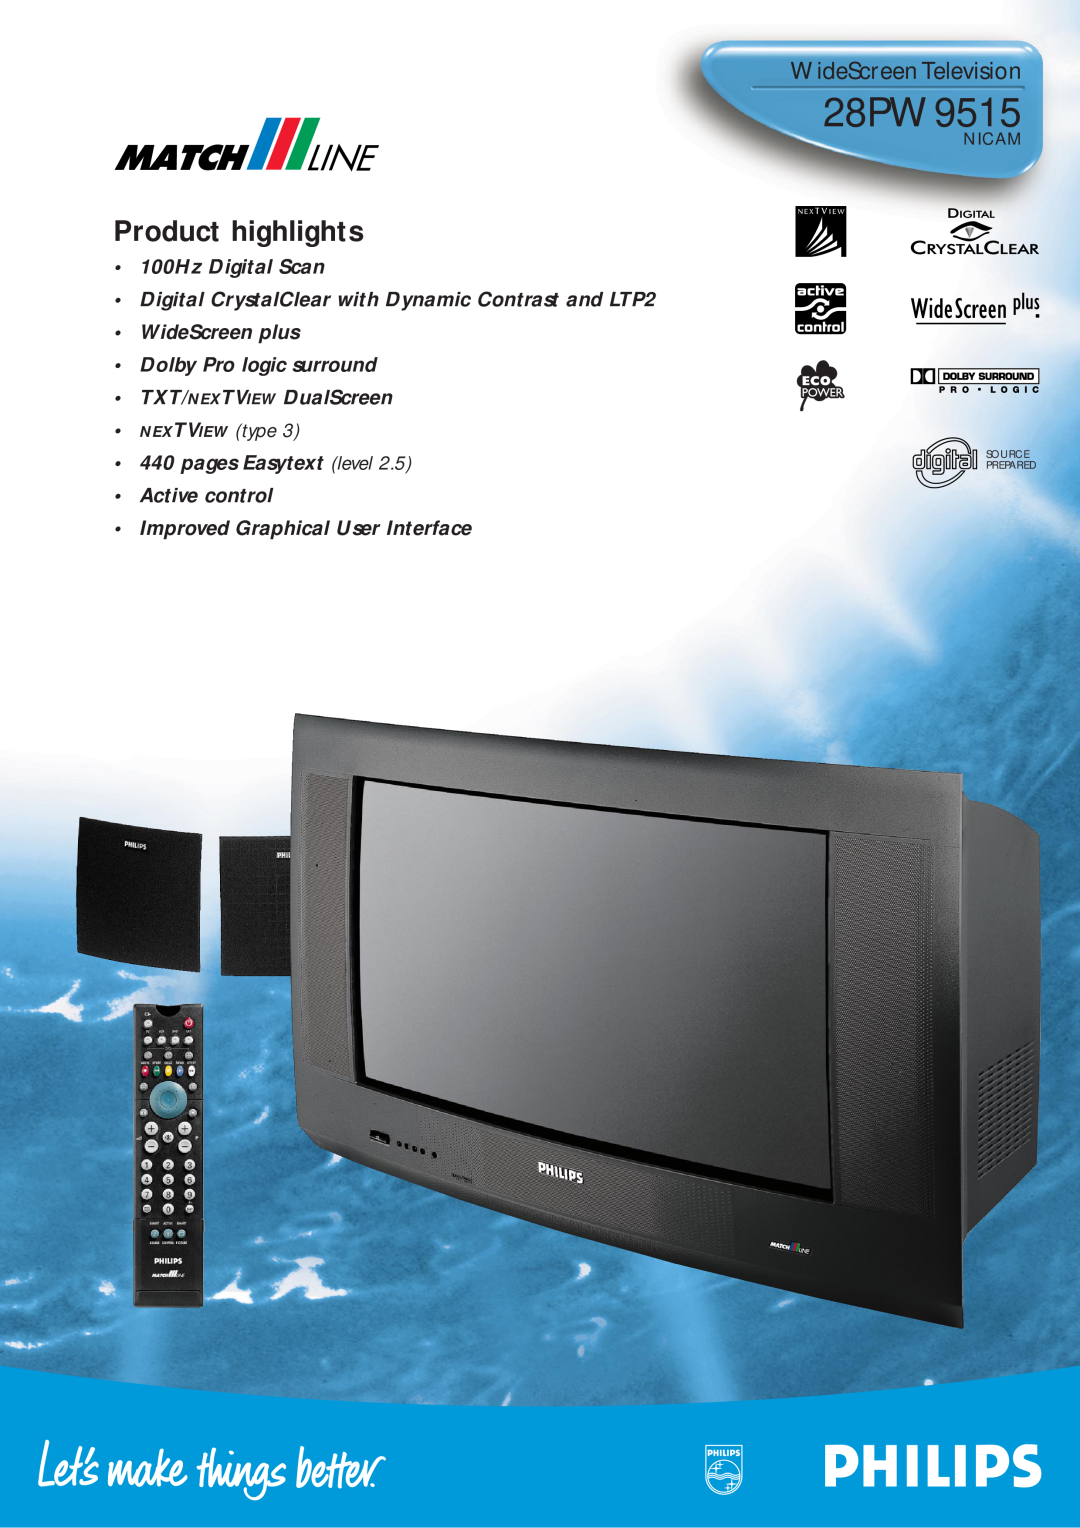 Philips 28PW9515 manual Product highlights, WideScreen Television, 100Hz Digital Scan, NEXTVIEW type, Nicam 